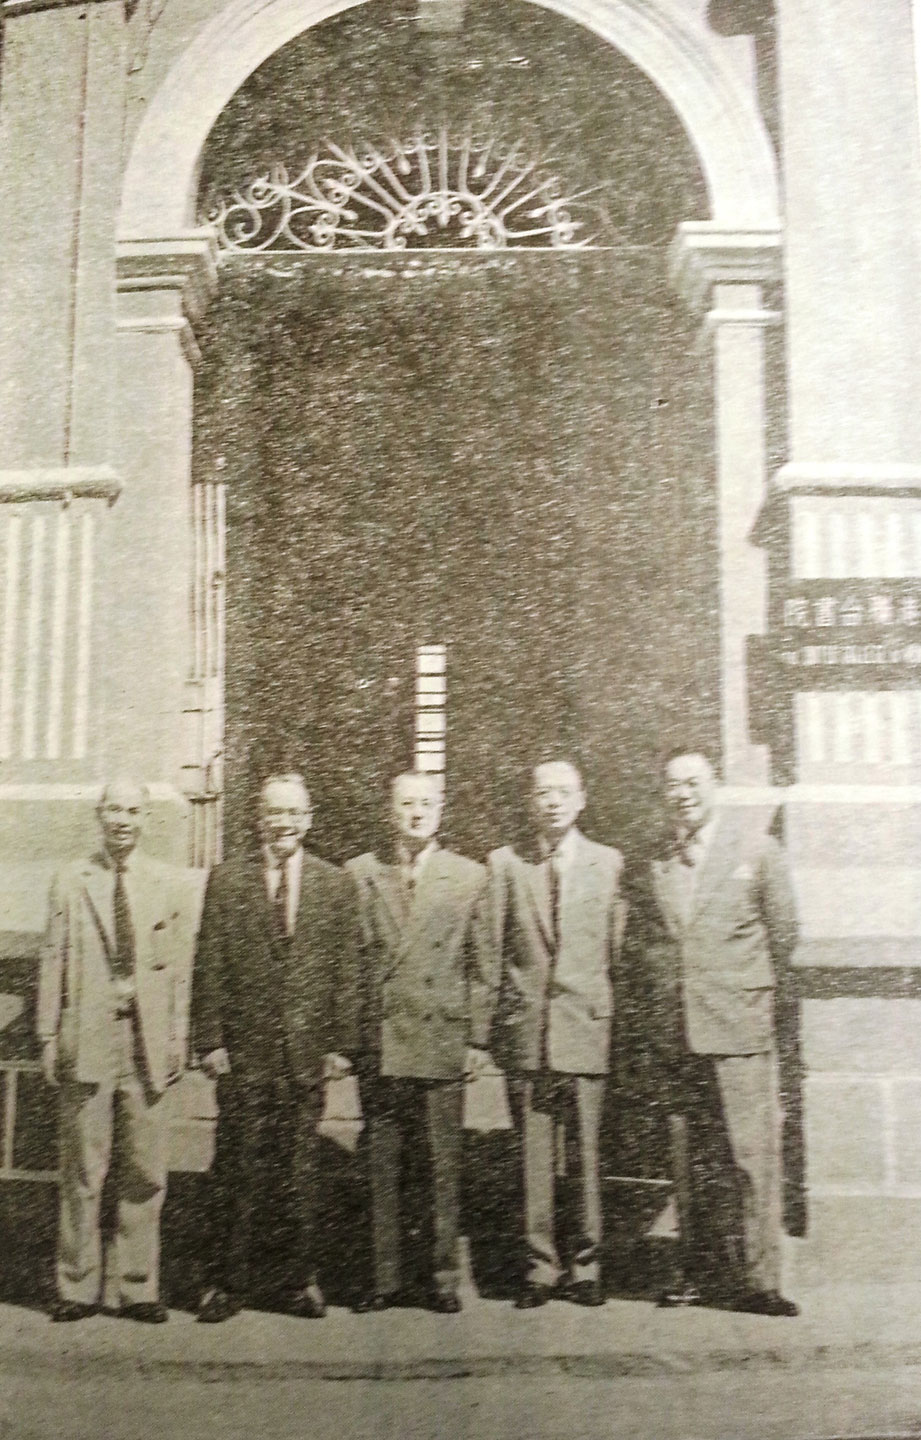 Presidents of the five colleges that made up United College (1956)